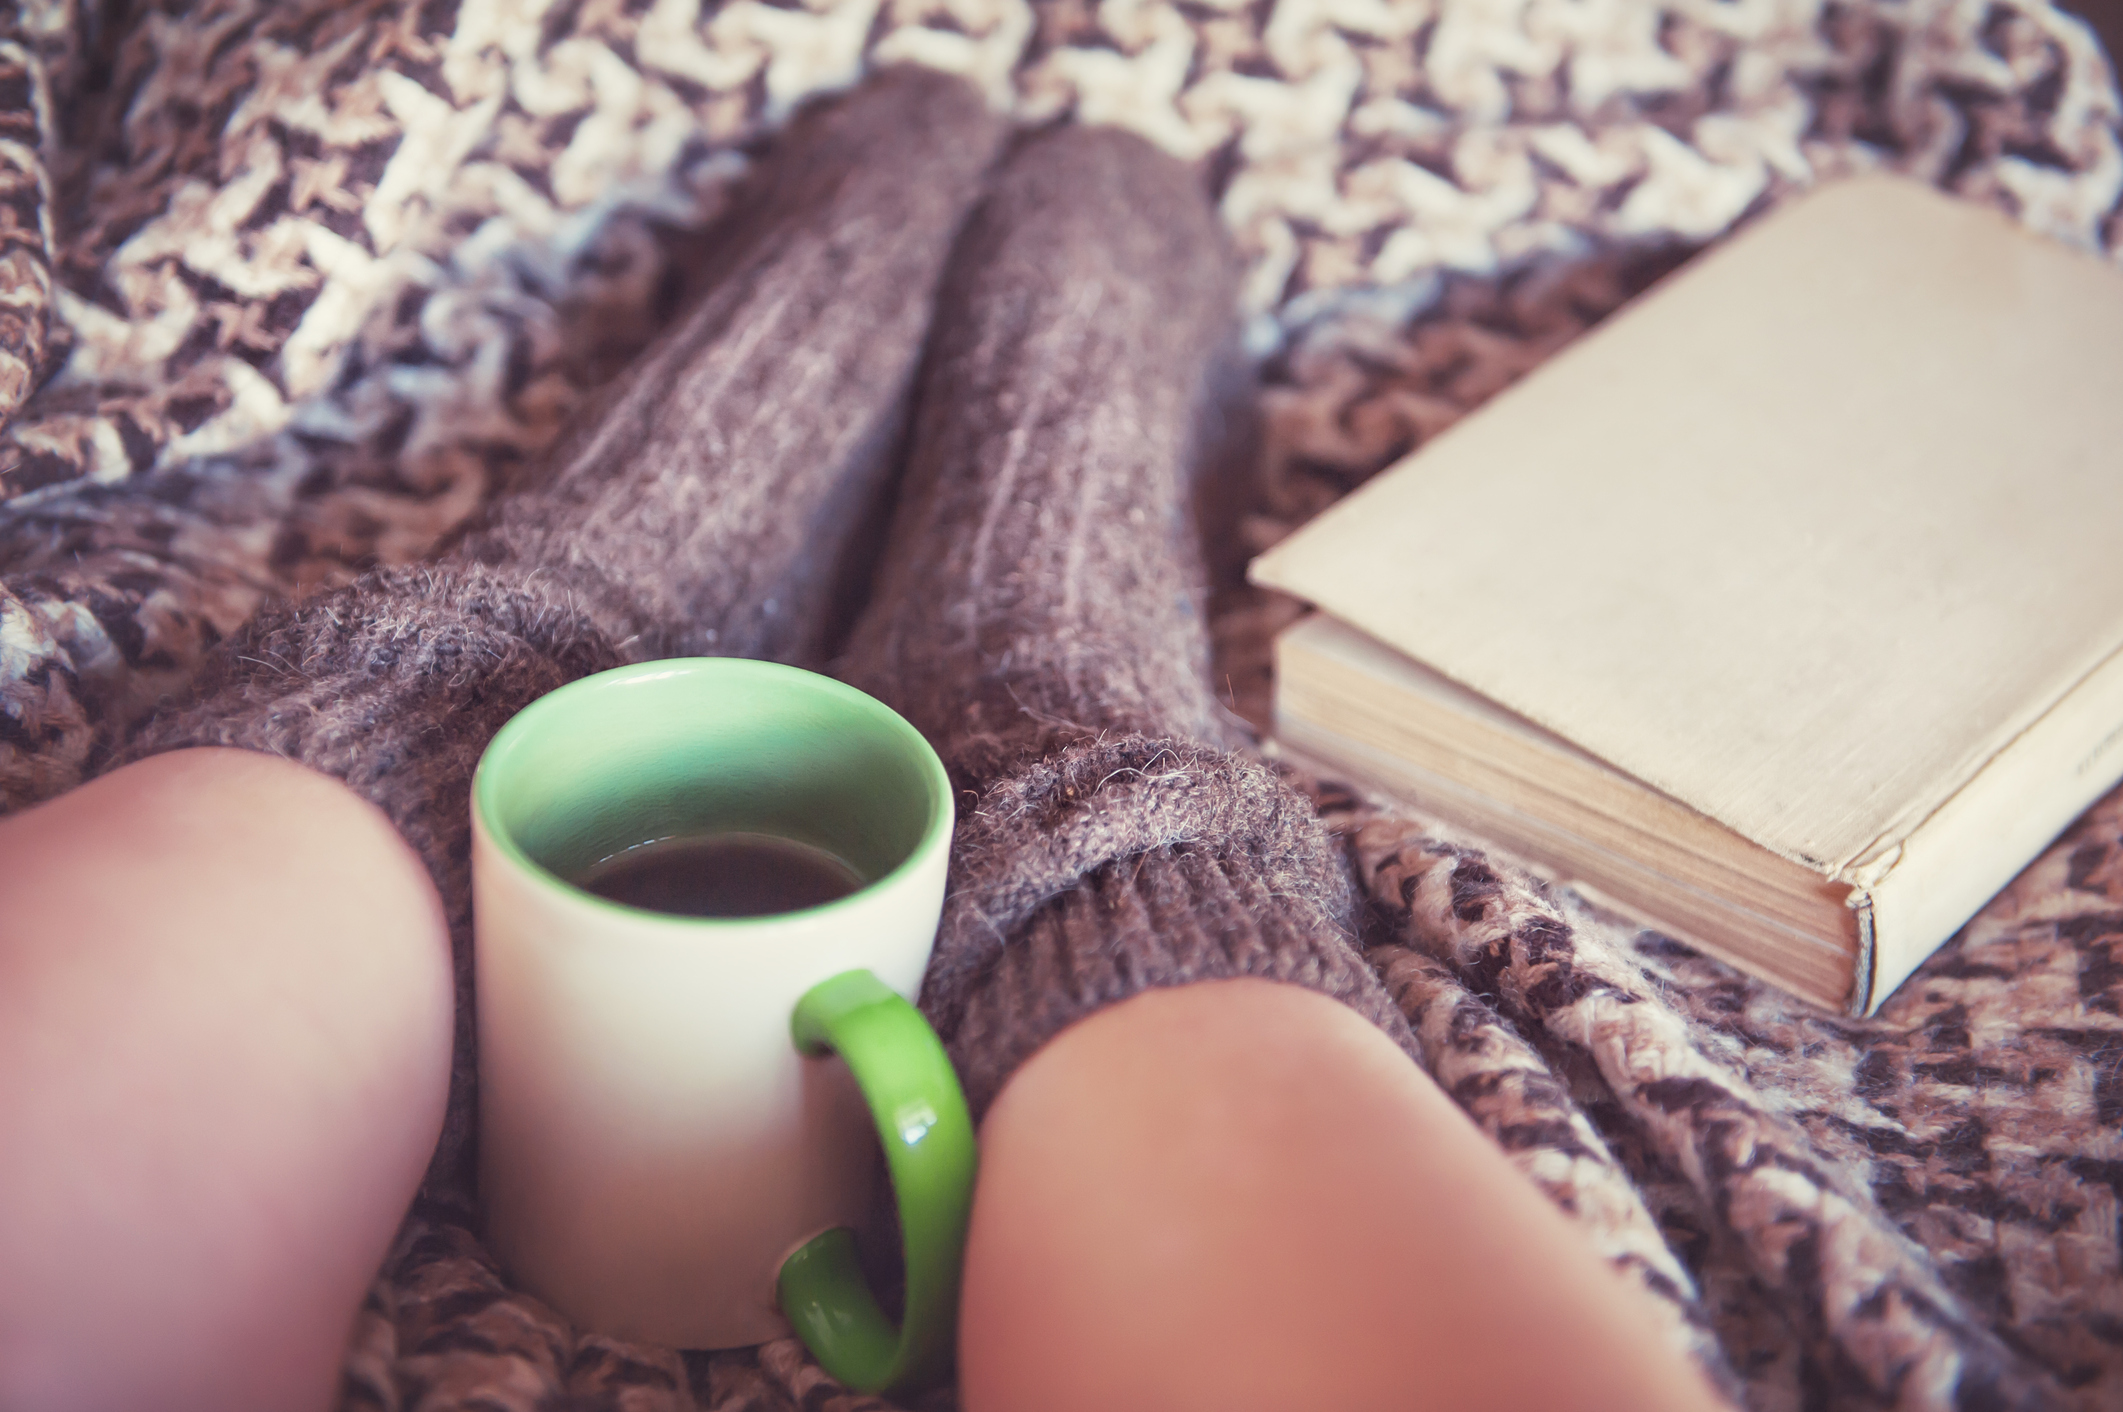 Woman in woollen socks with old book and a cup of tea (Thinkstock/PA)